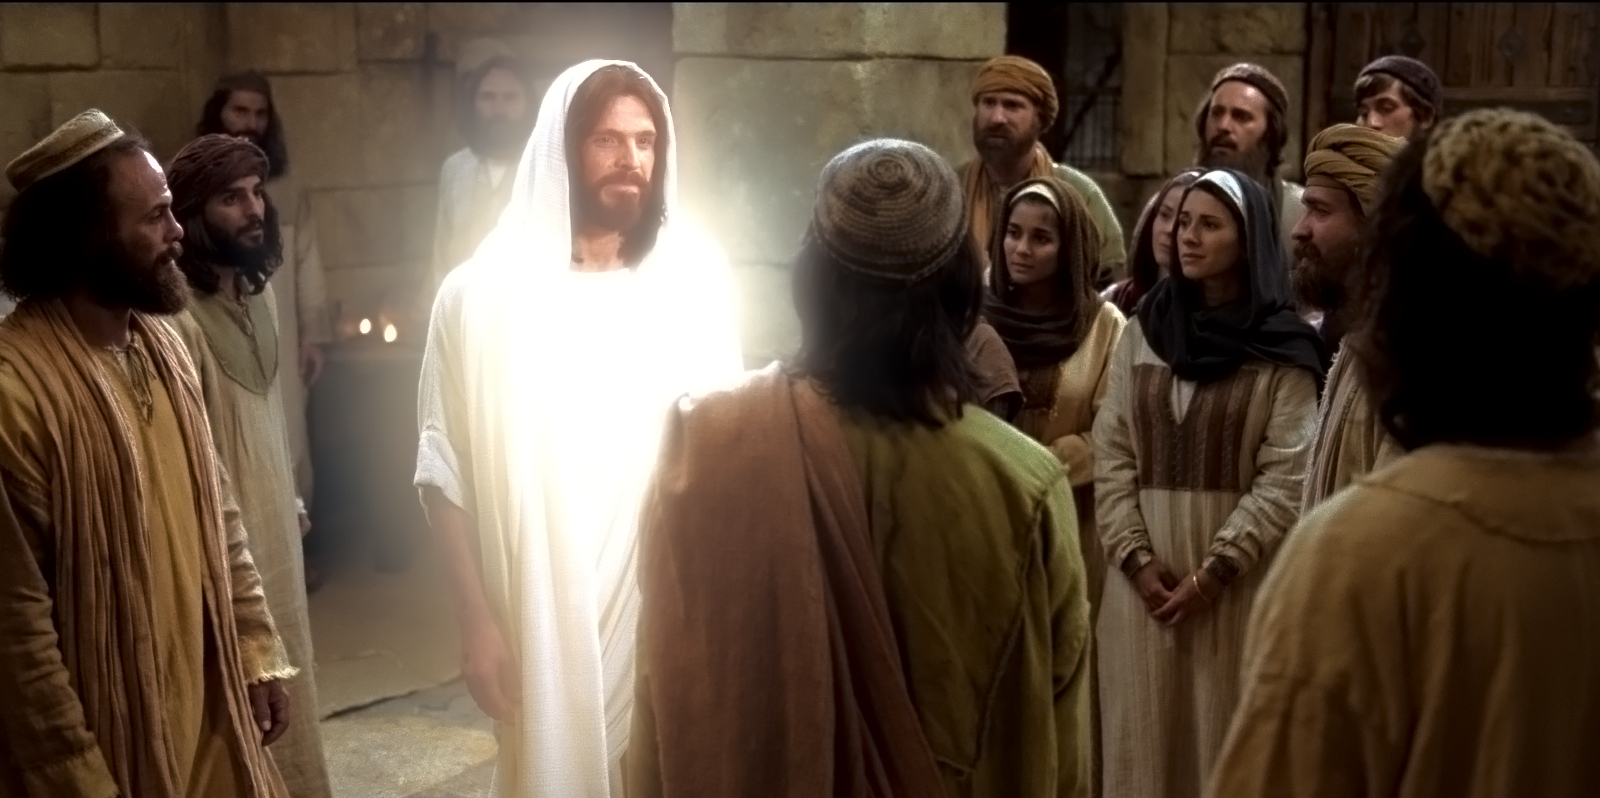 Jesus appeared to disciples